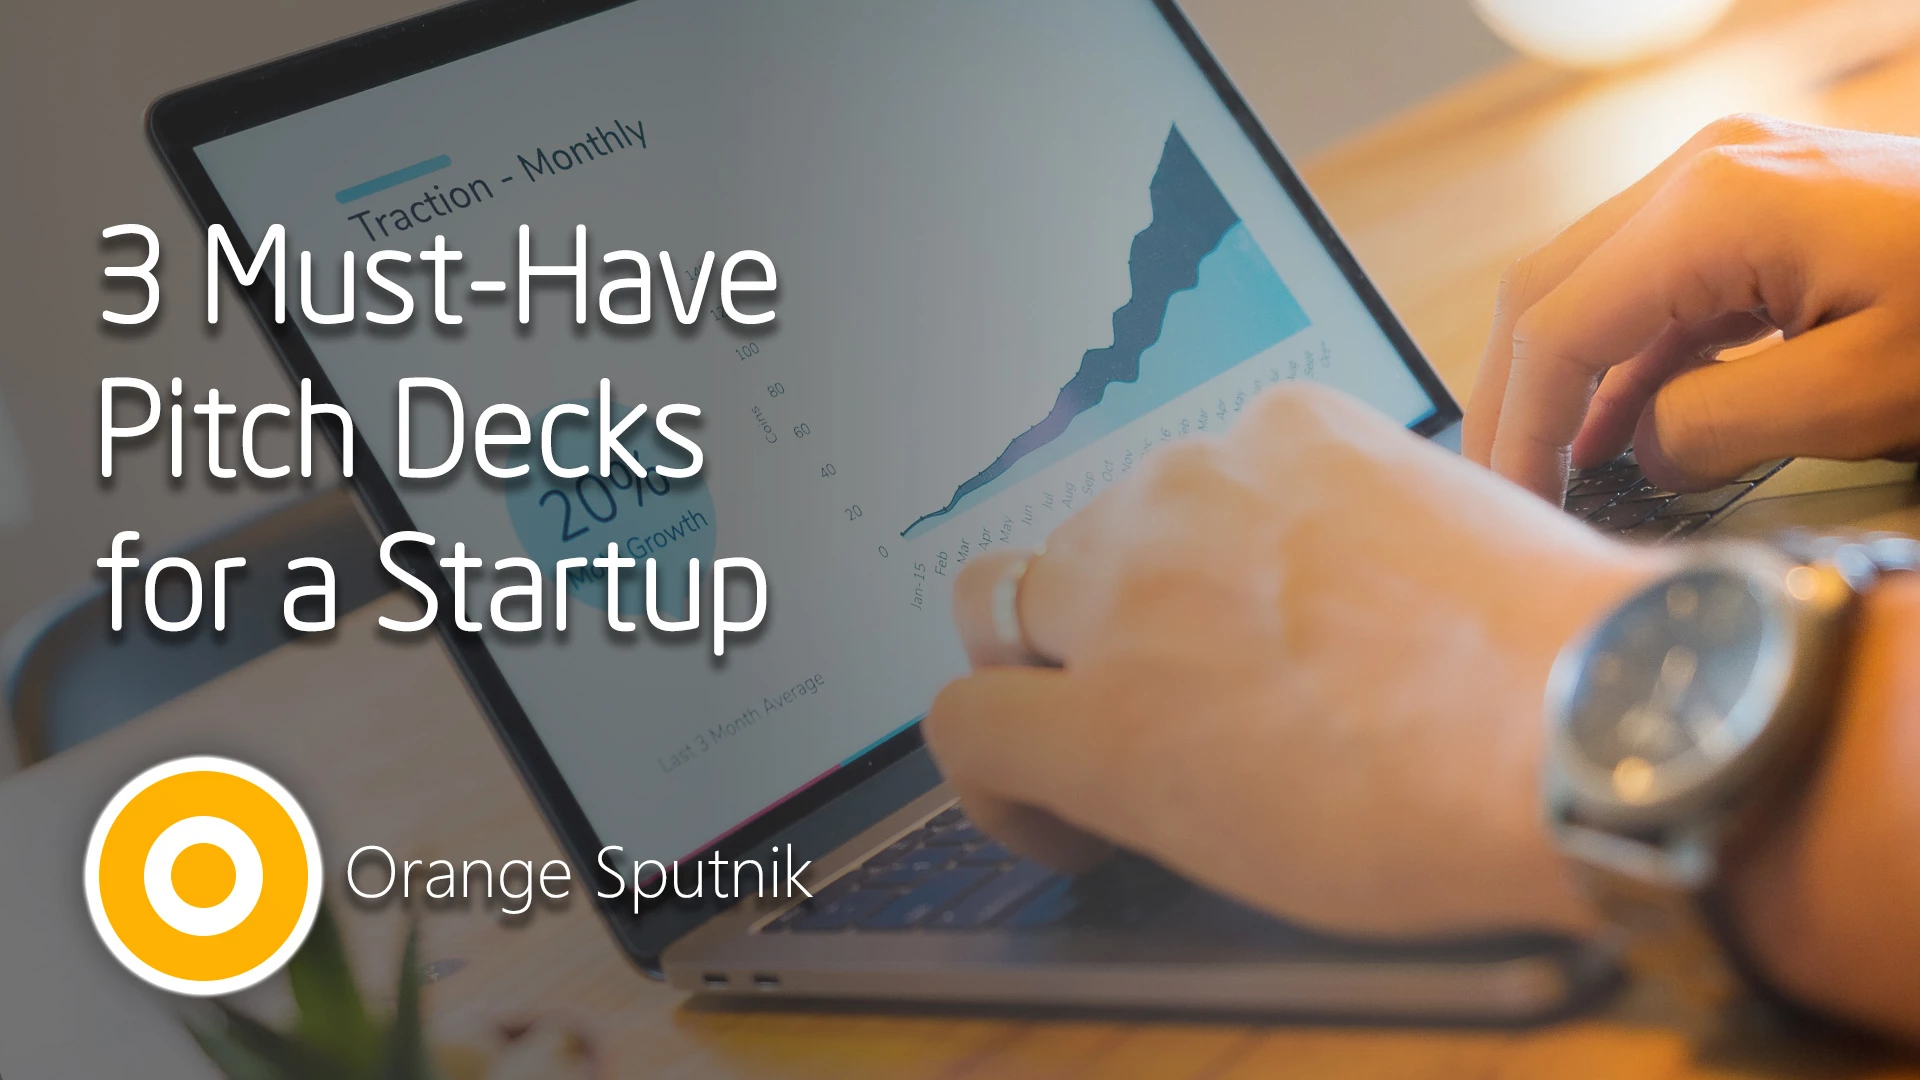 3 Must-Have Pitch Decks for a Startup